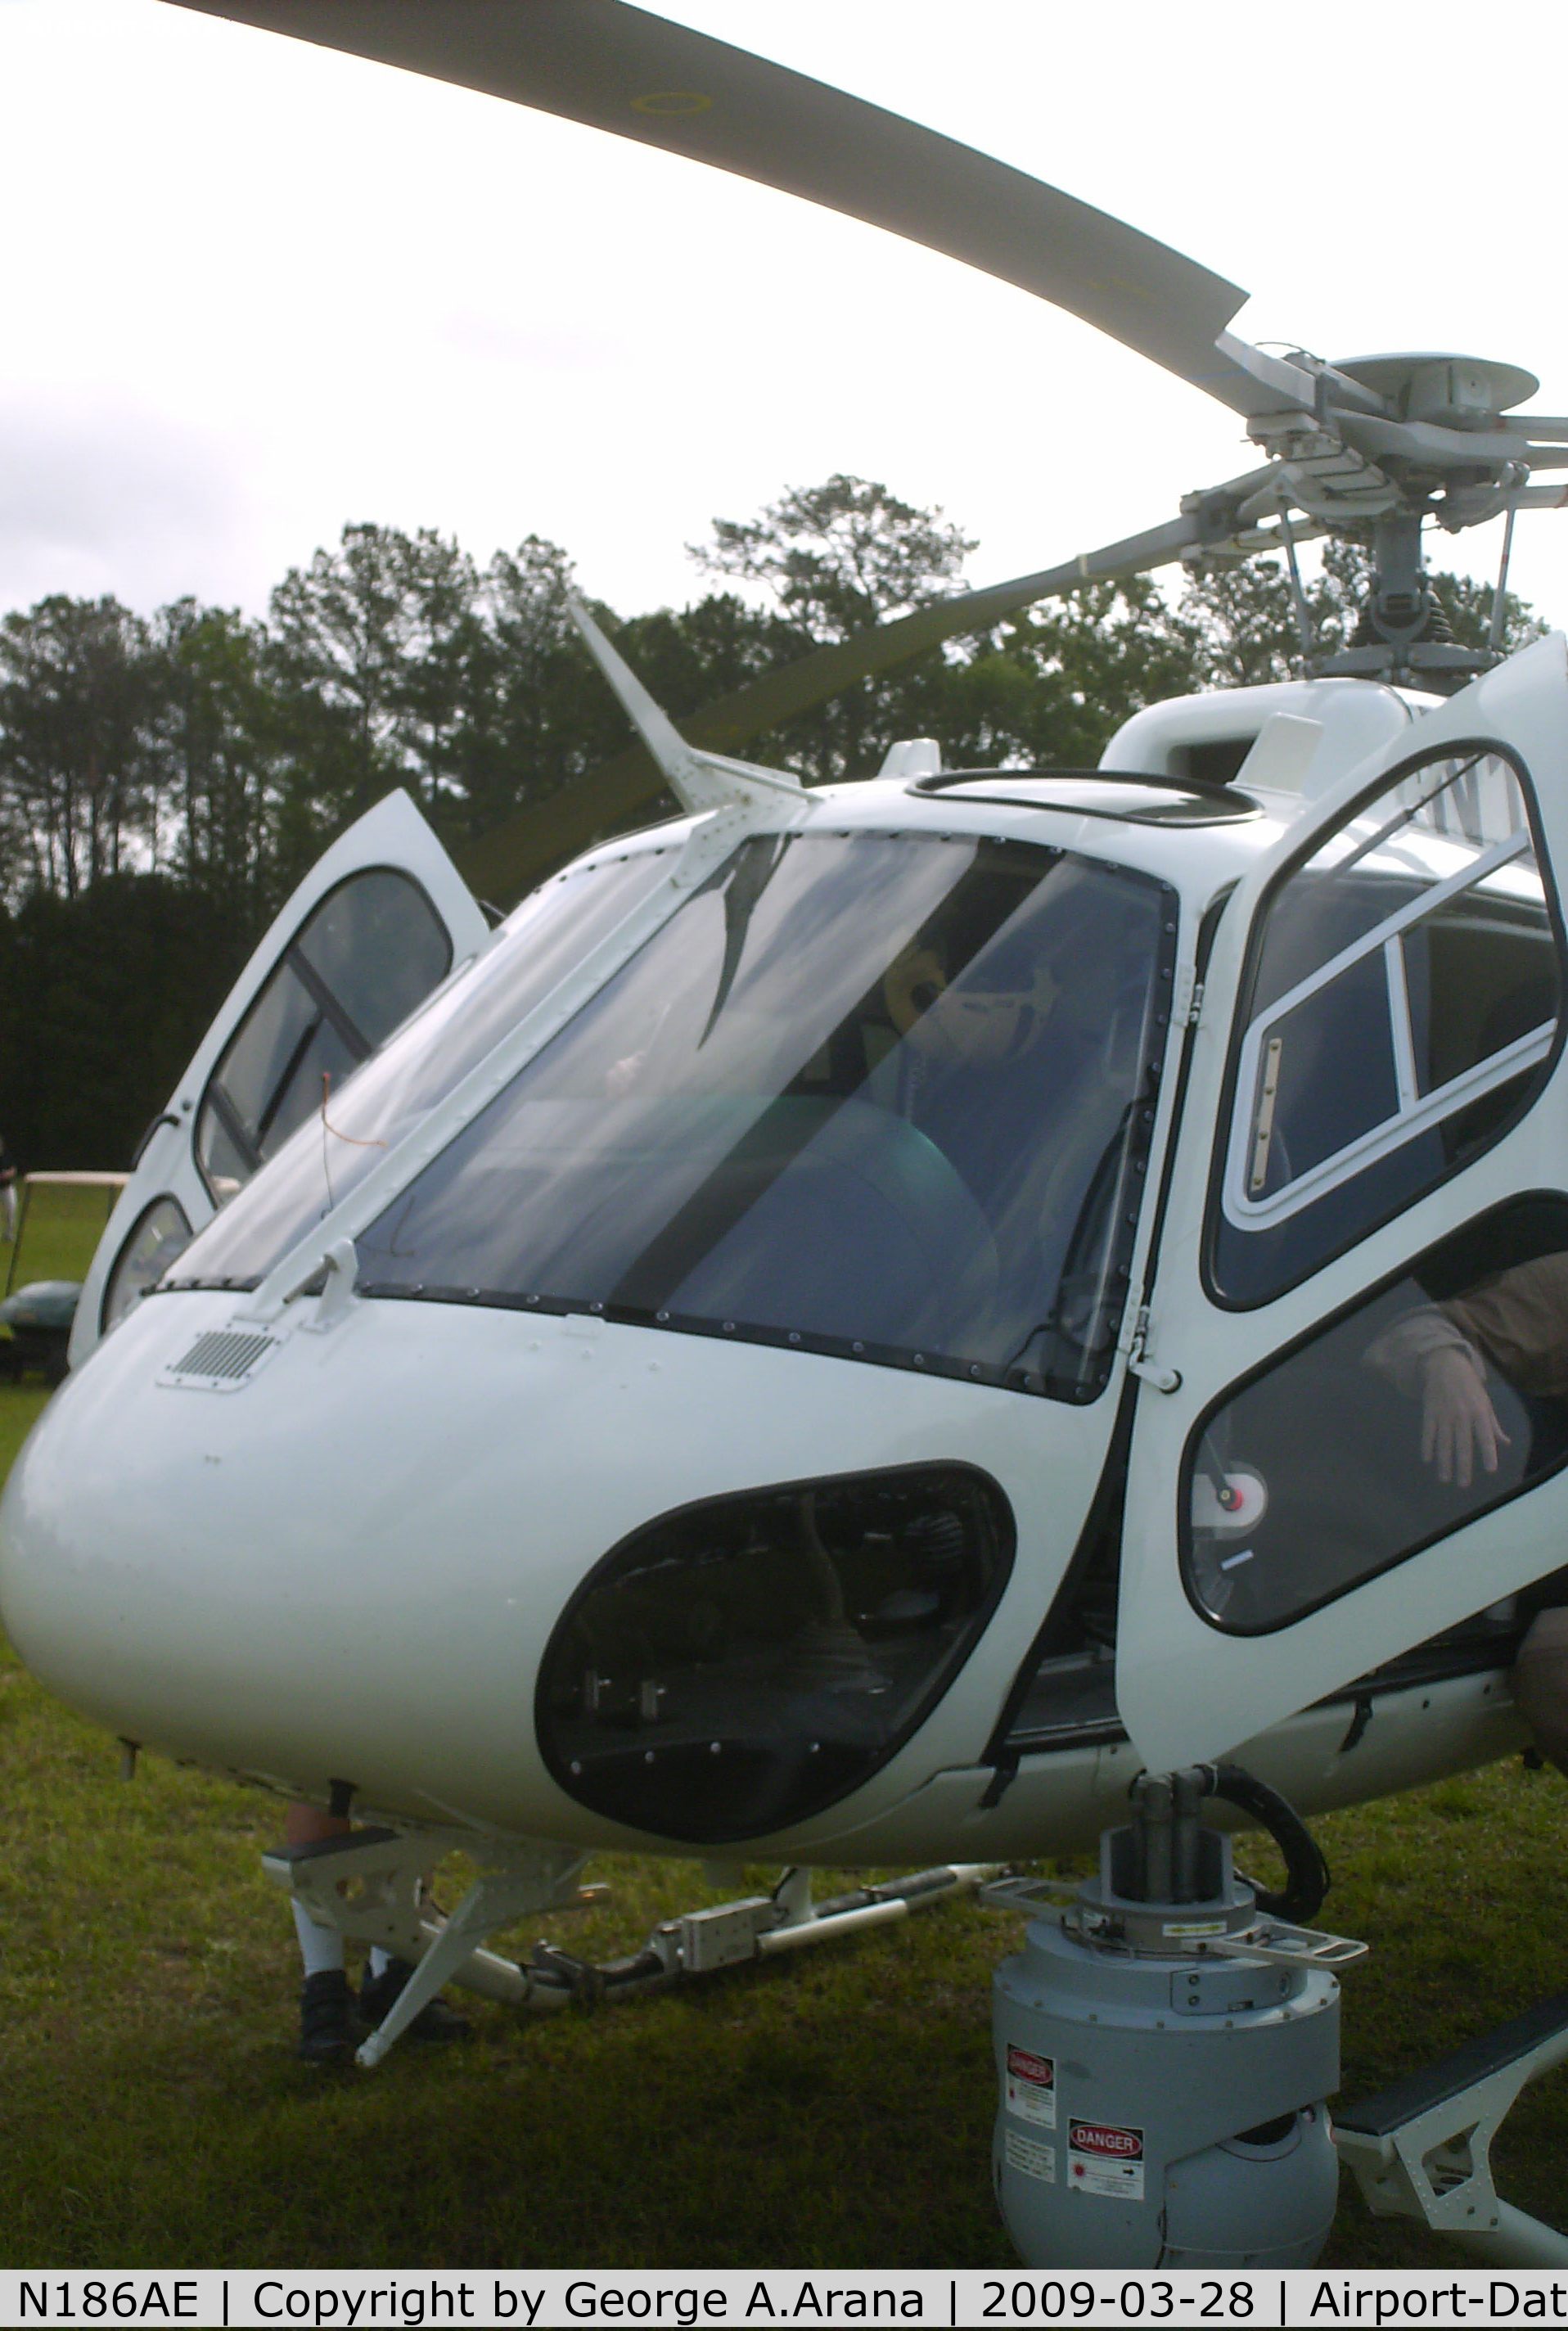 N186AE, 2004 Eurocopter AS-350B-3 Ecureuil Ecureuil C/N 3872, Port front quarter view and detail